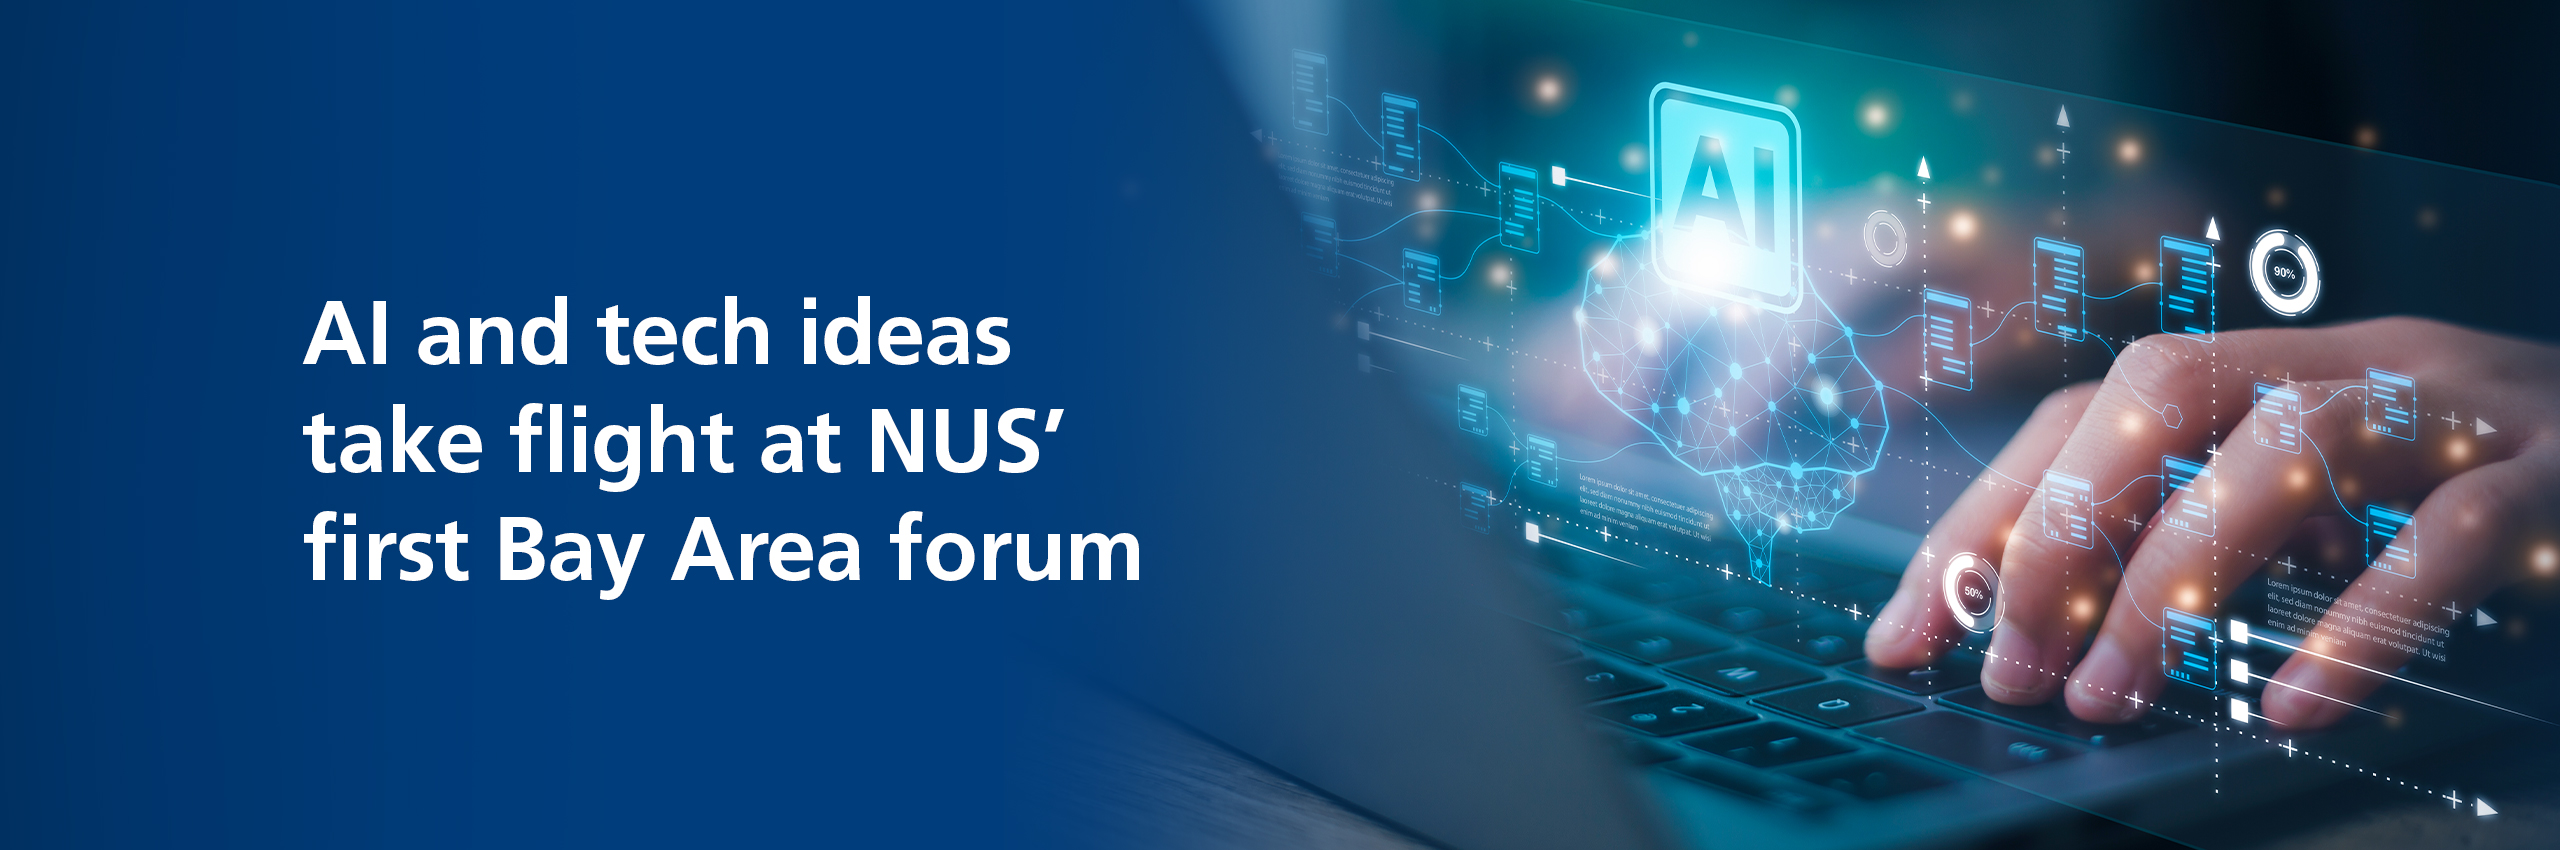 AI and tech ideas take flight at NUS’ first Bay Area forum